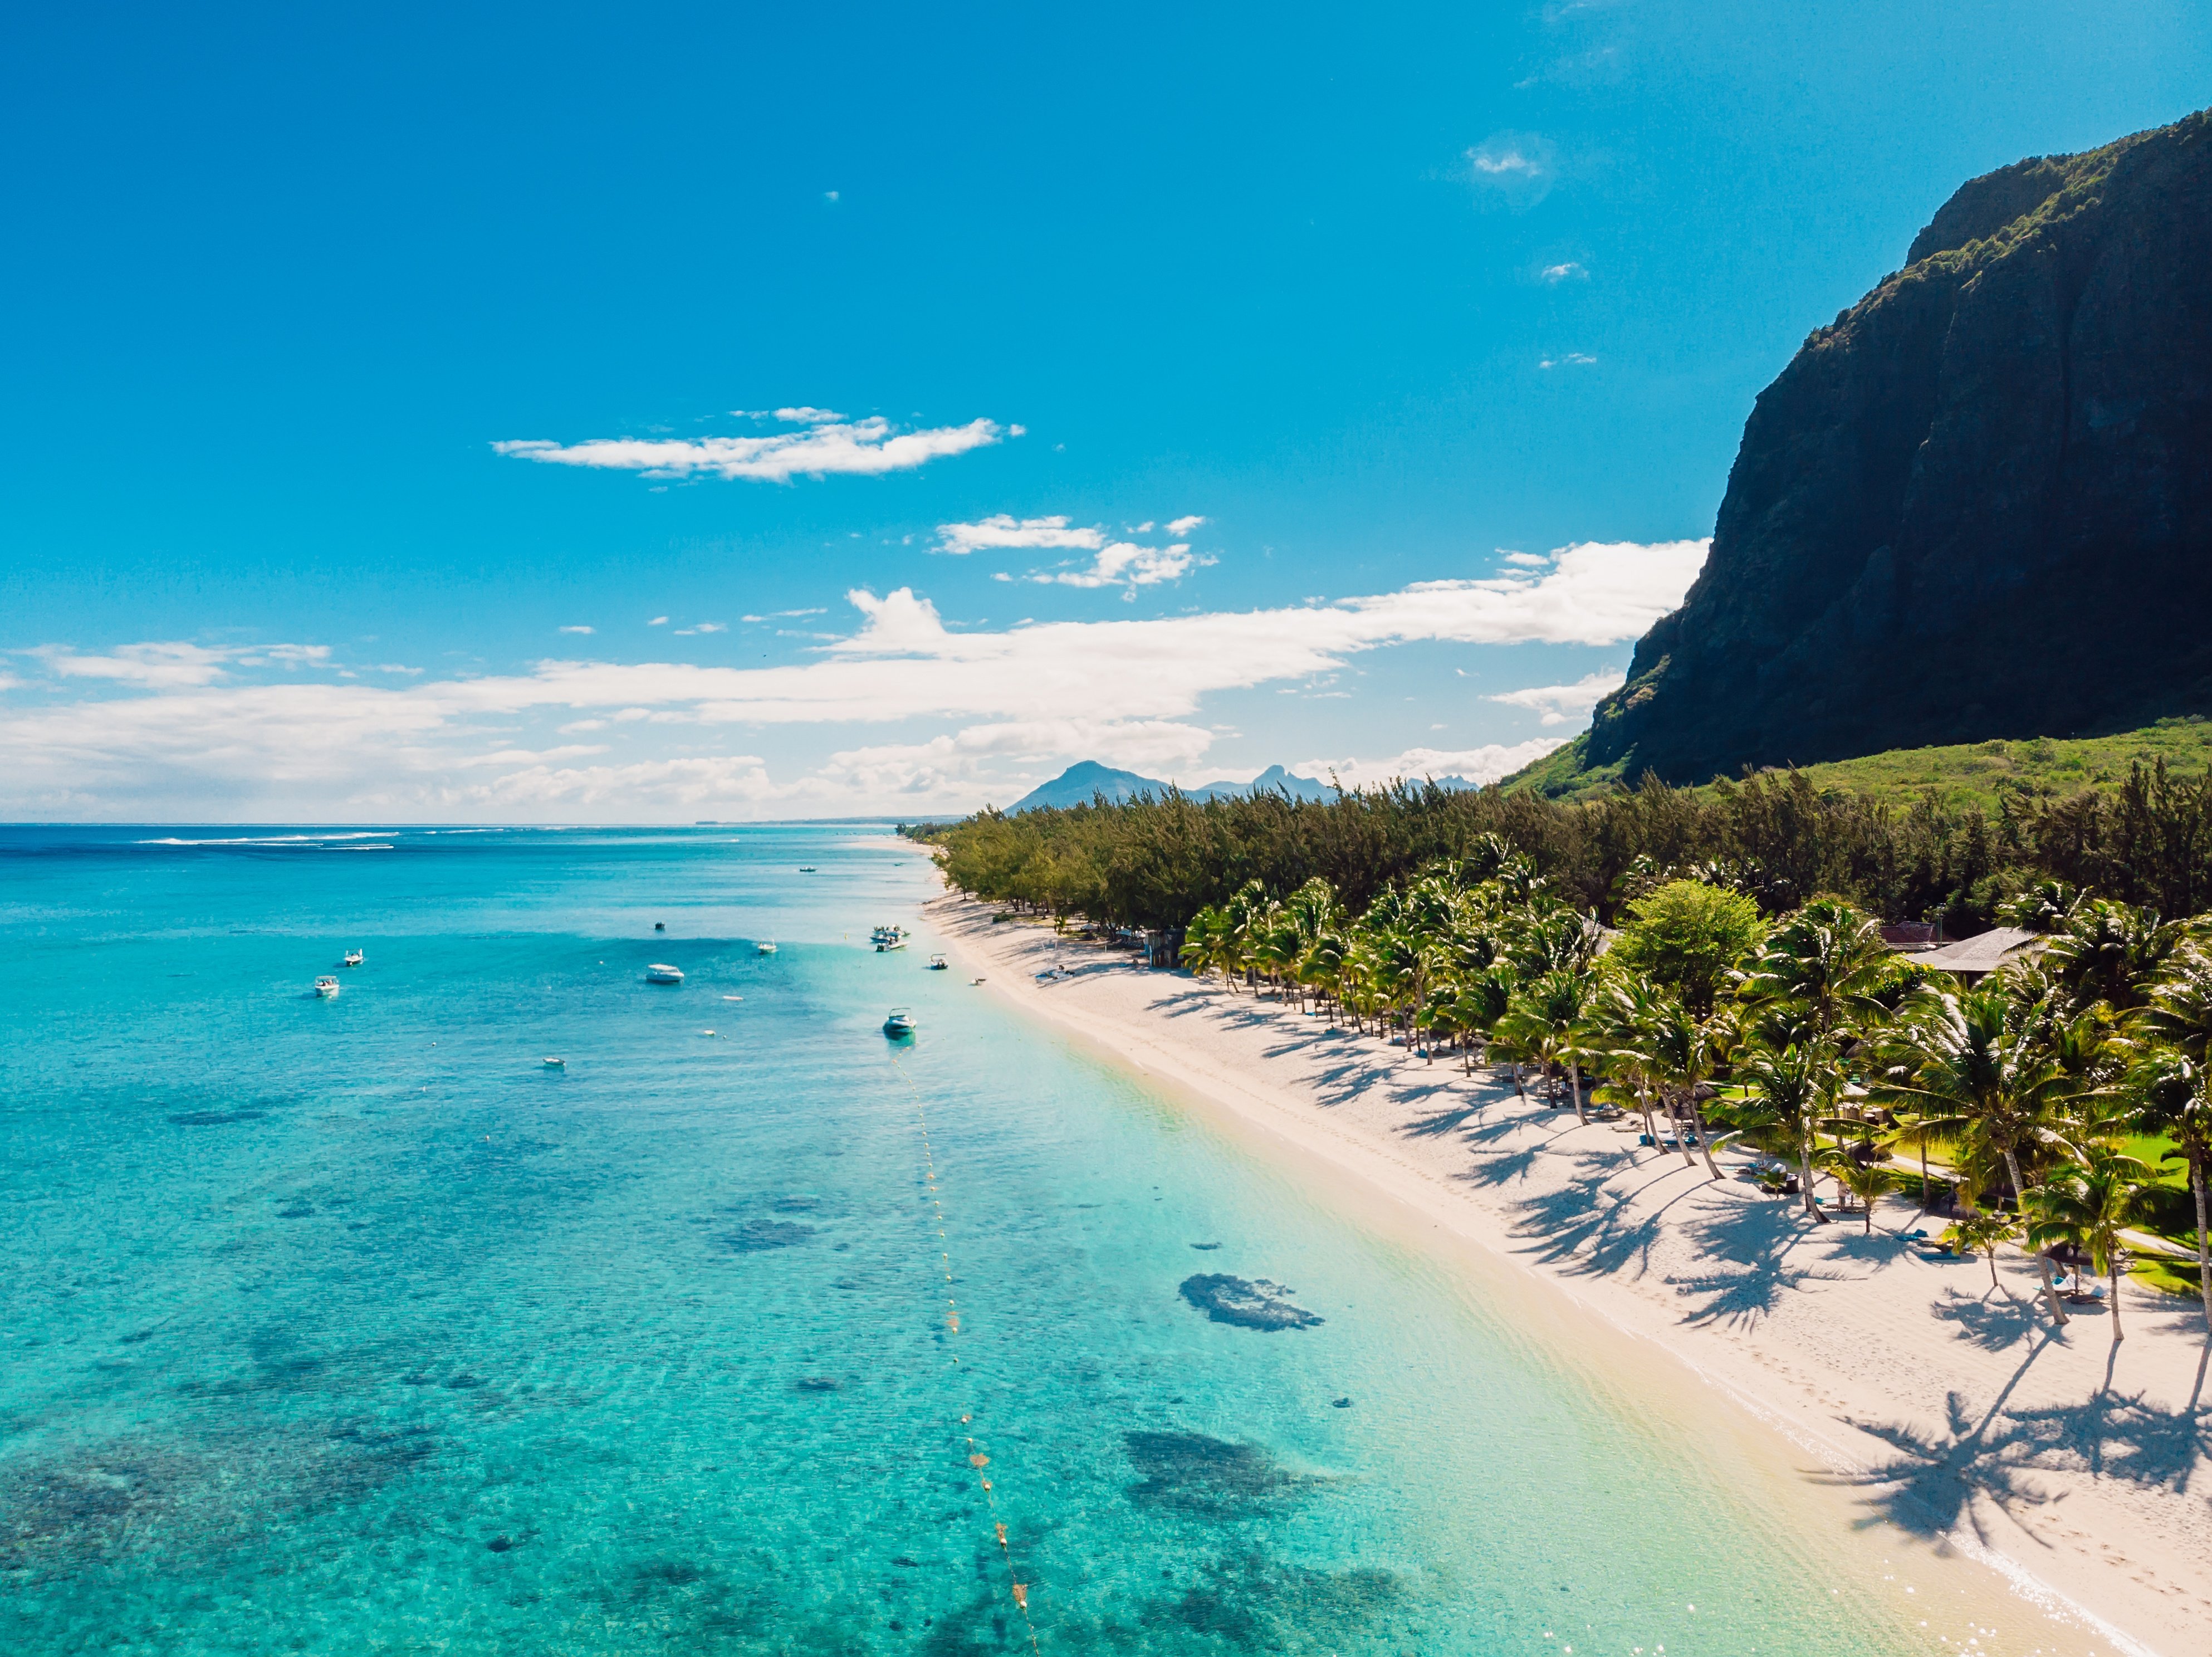 mauritius holidays best time to visit